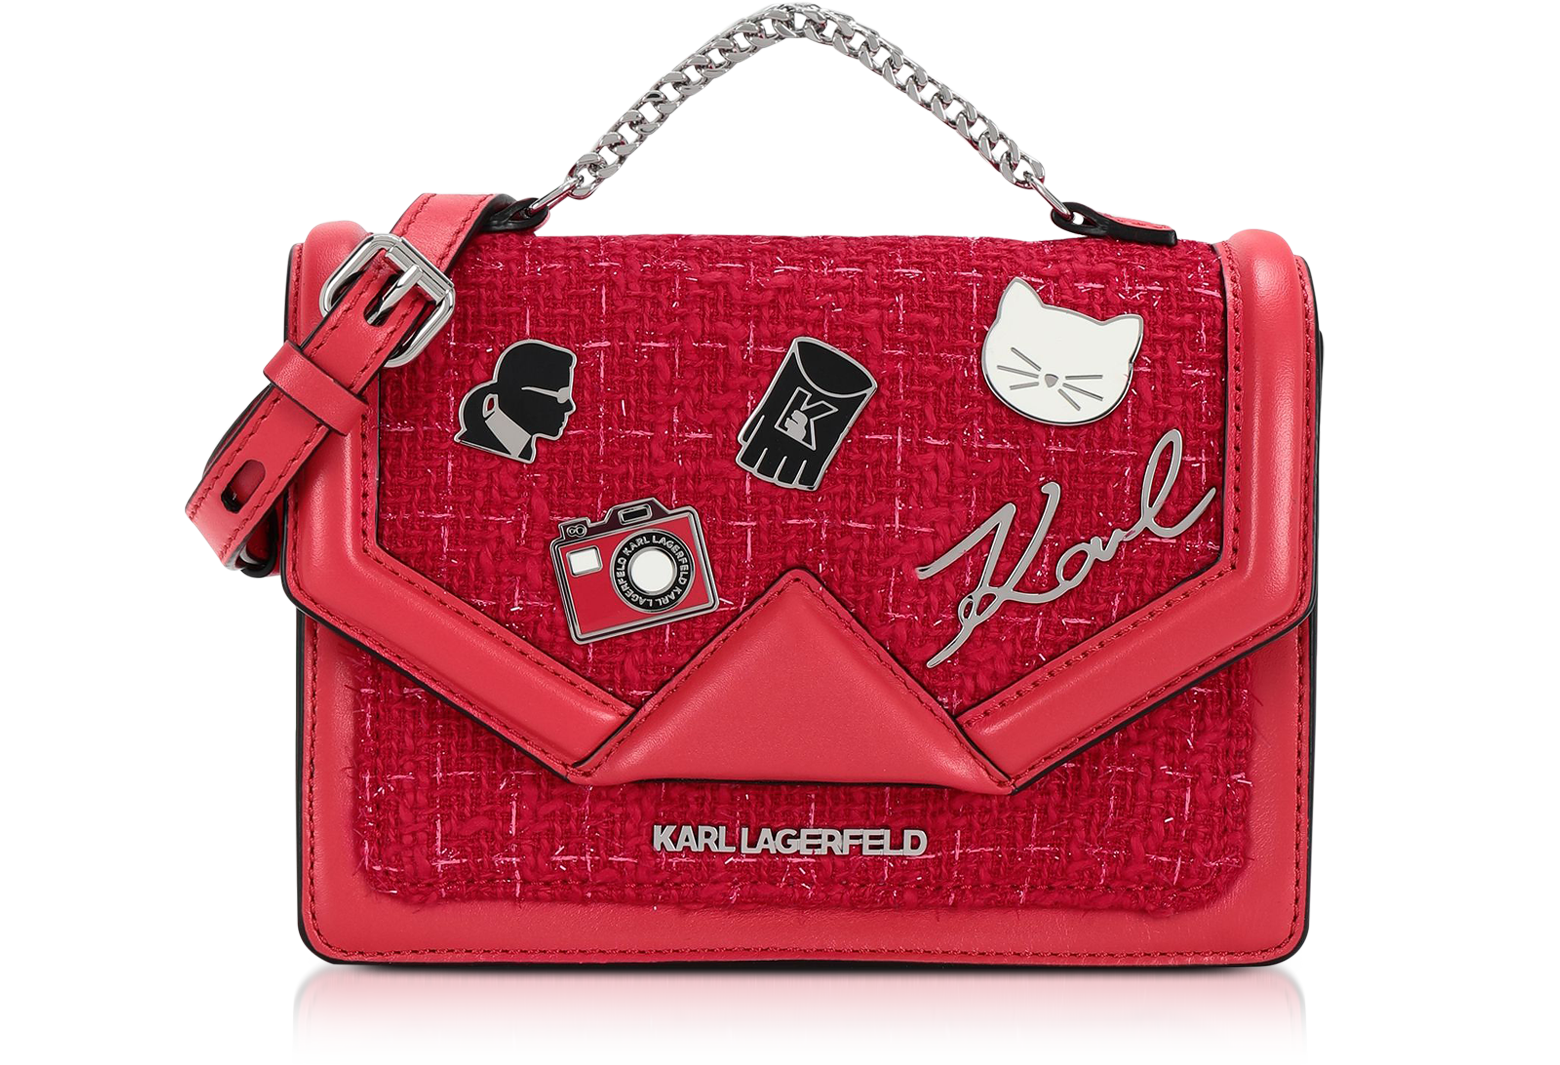 Vintage Karl Lagerfeld Handbags and Purses - 21 For Sale at